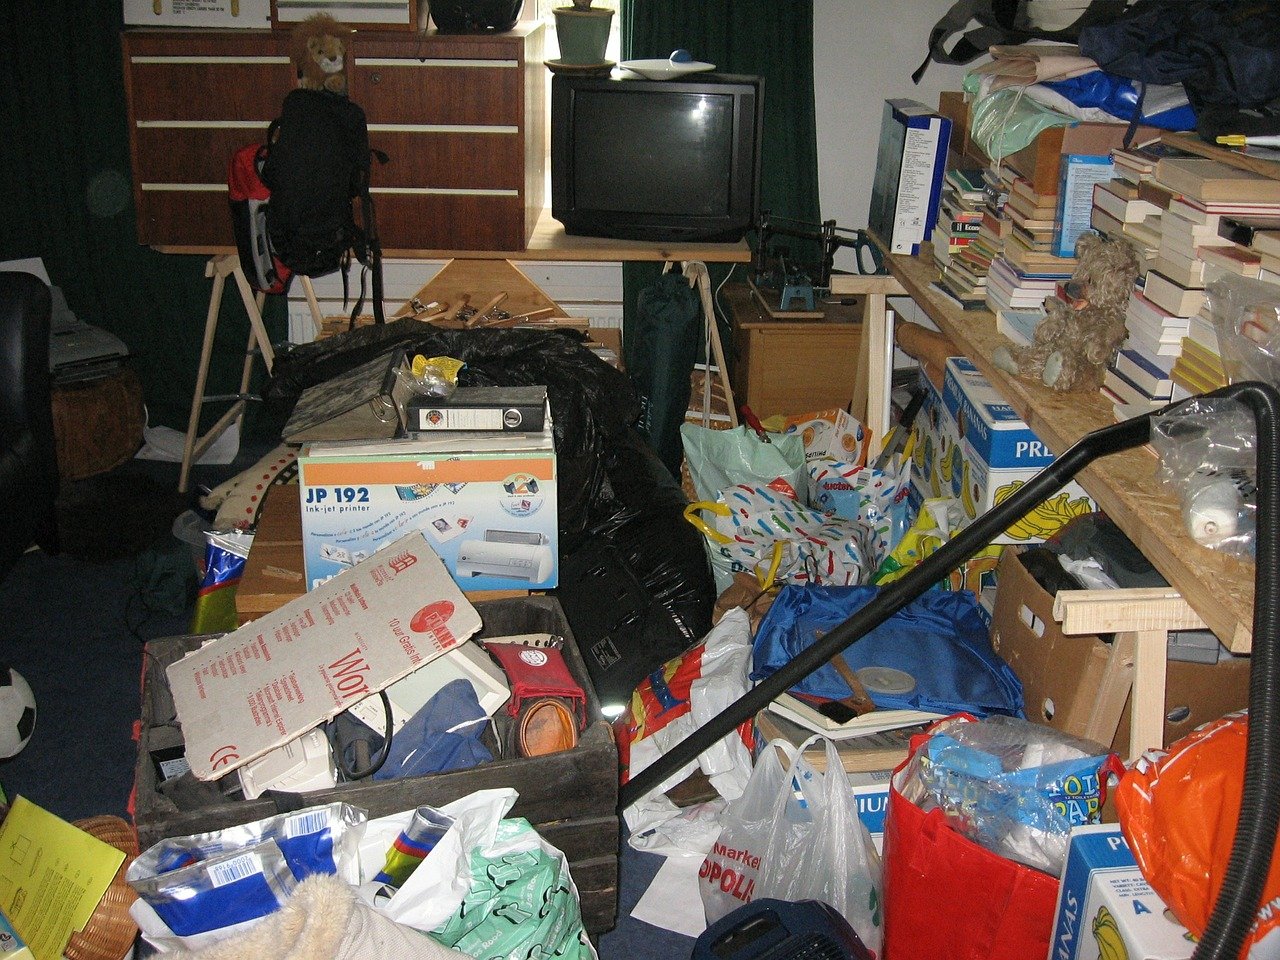 Clutter clearing – weighed down by clutter